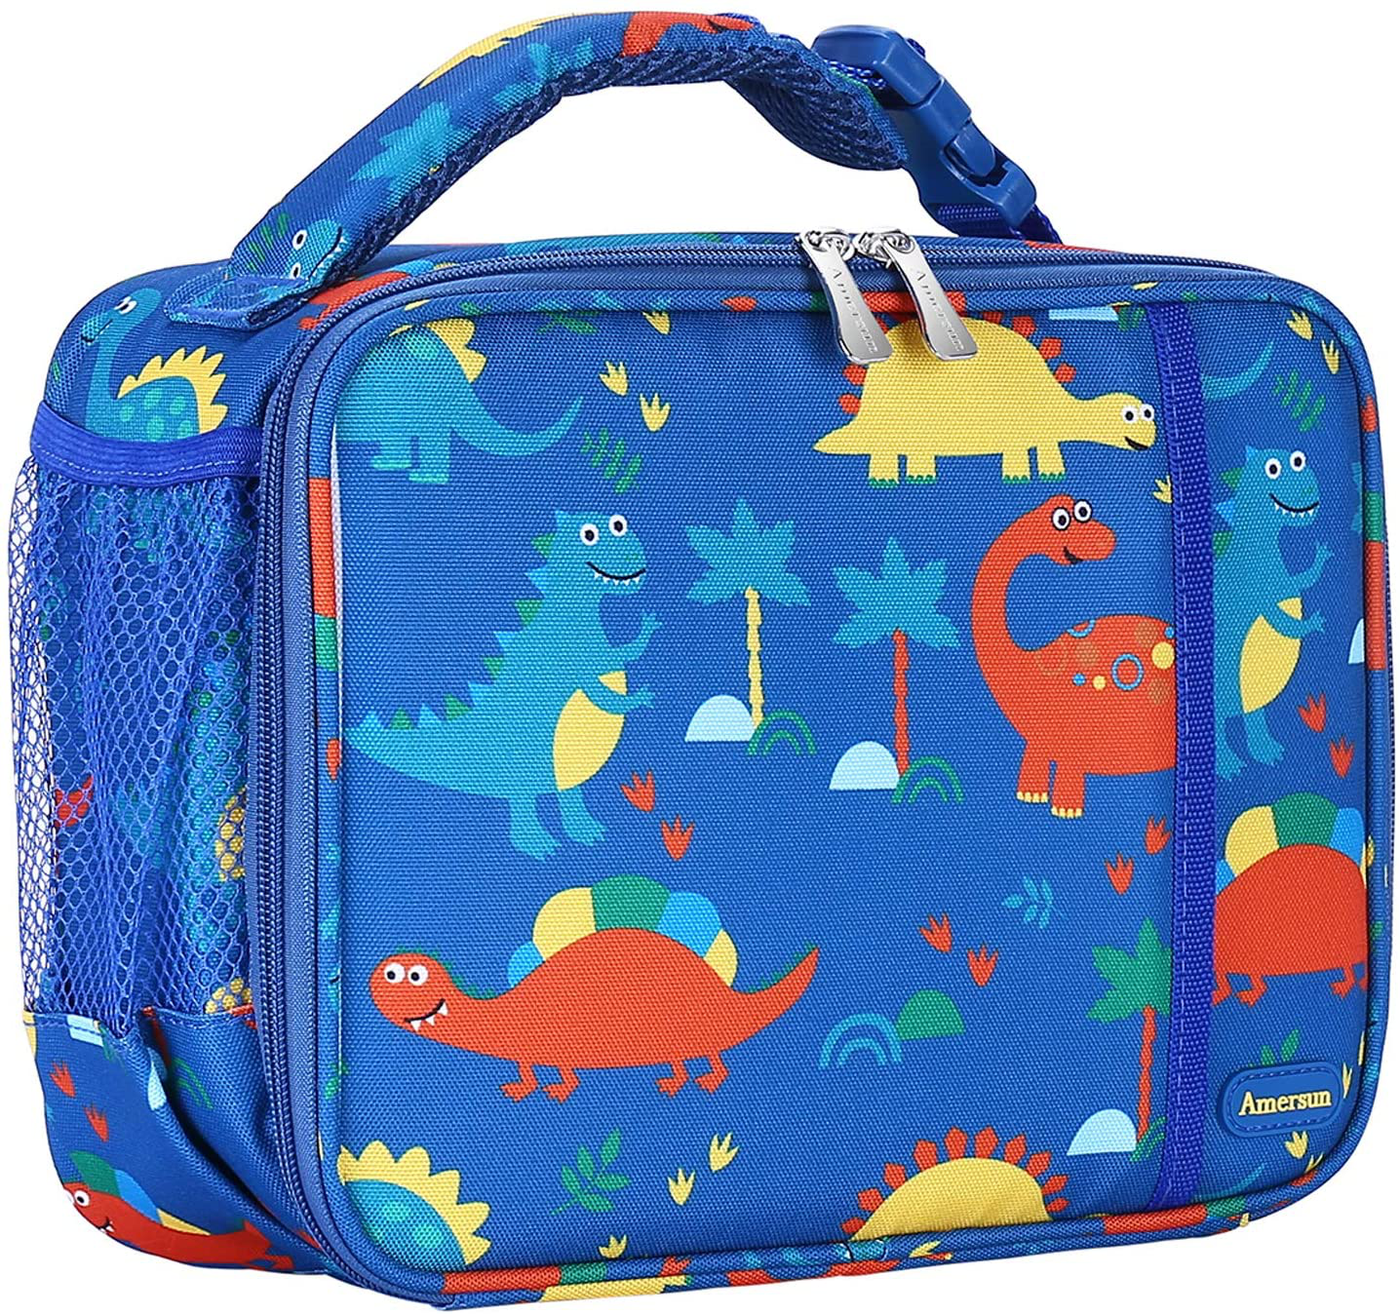 Kids Lunch Box with Supper Padded Inner Keep Food Cold Warm for Longer Time,Amersun Leak-proof Solid Insulated School Lunch Bag with Multi-Pocket for Teen Boys Girls,CPC Certified,Dinosaur